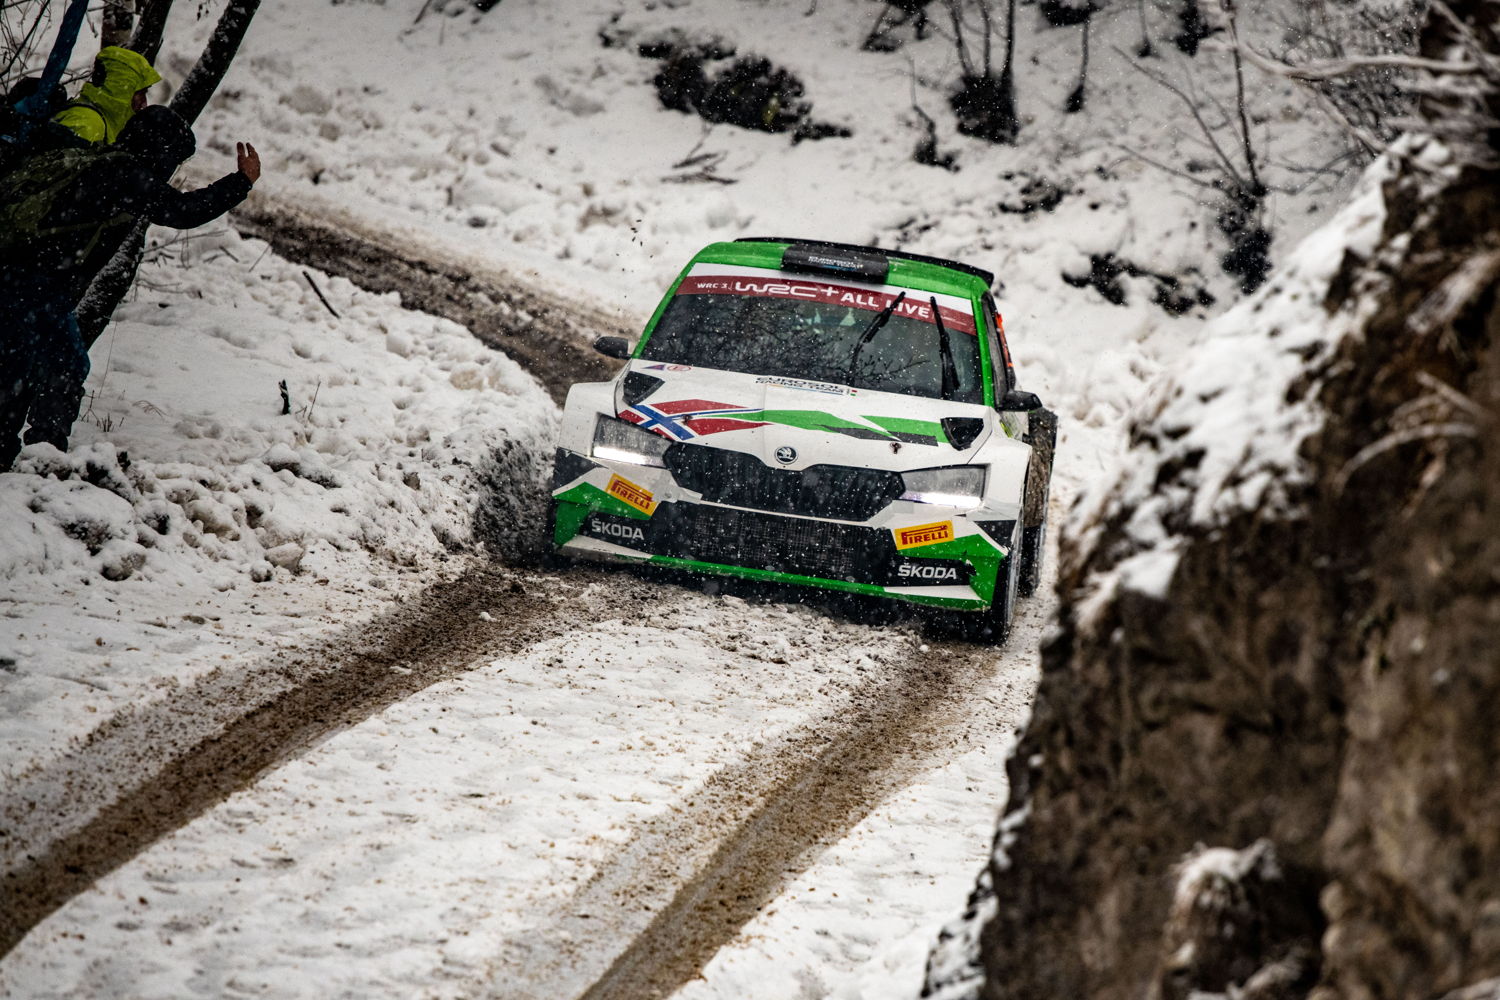 Driving a ŠKODA FABIA Rally2 evo of Eurosol Racing Team Hungary, Norwegians Andreas Mikkelsen and Anders Jæger win WRC3